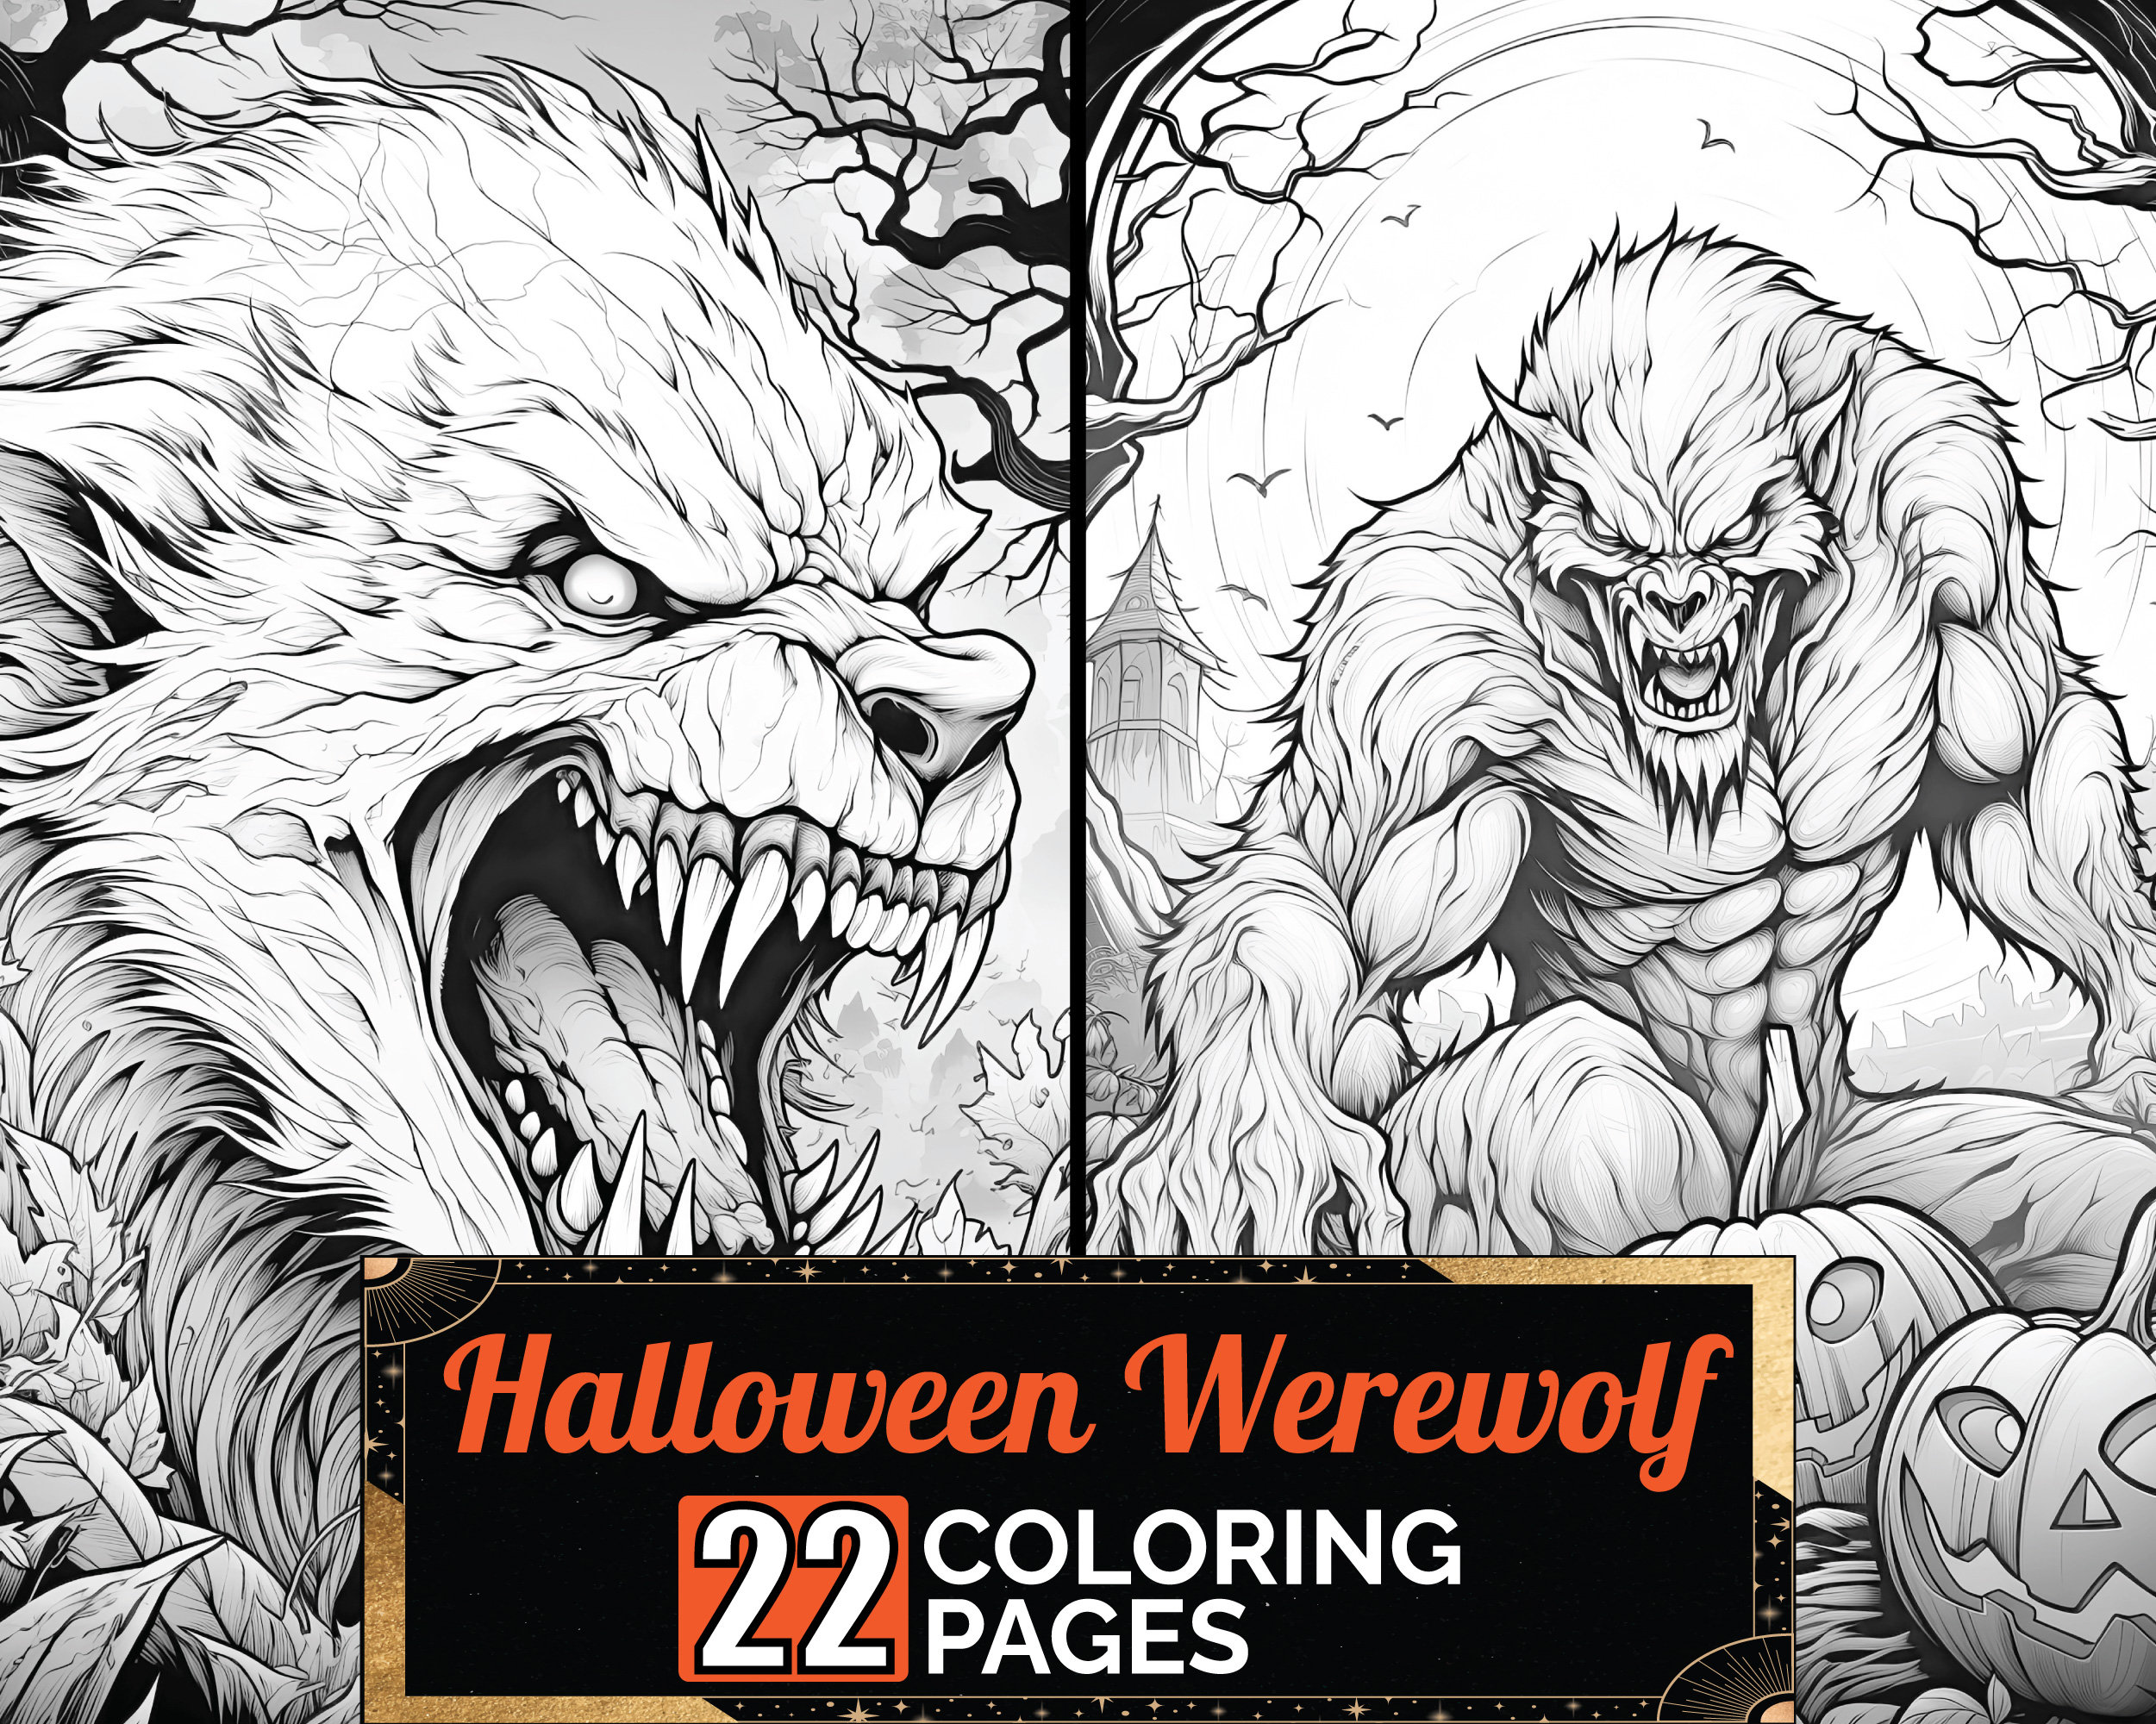 Halloween werewolf coloring book detail greyscale adult kids spooky colouring page a size sheet printable digital pdf download